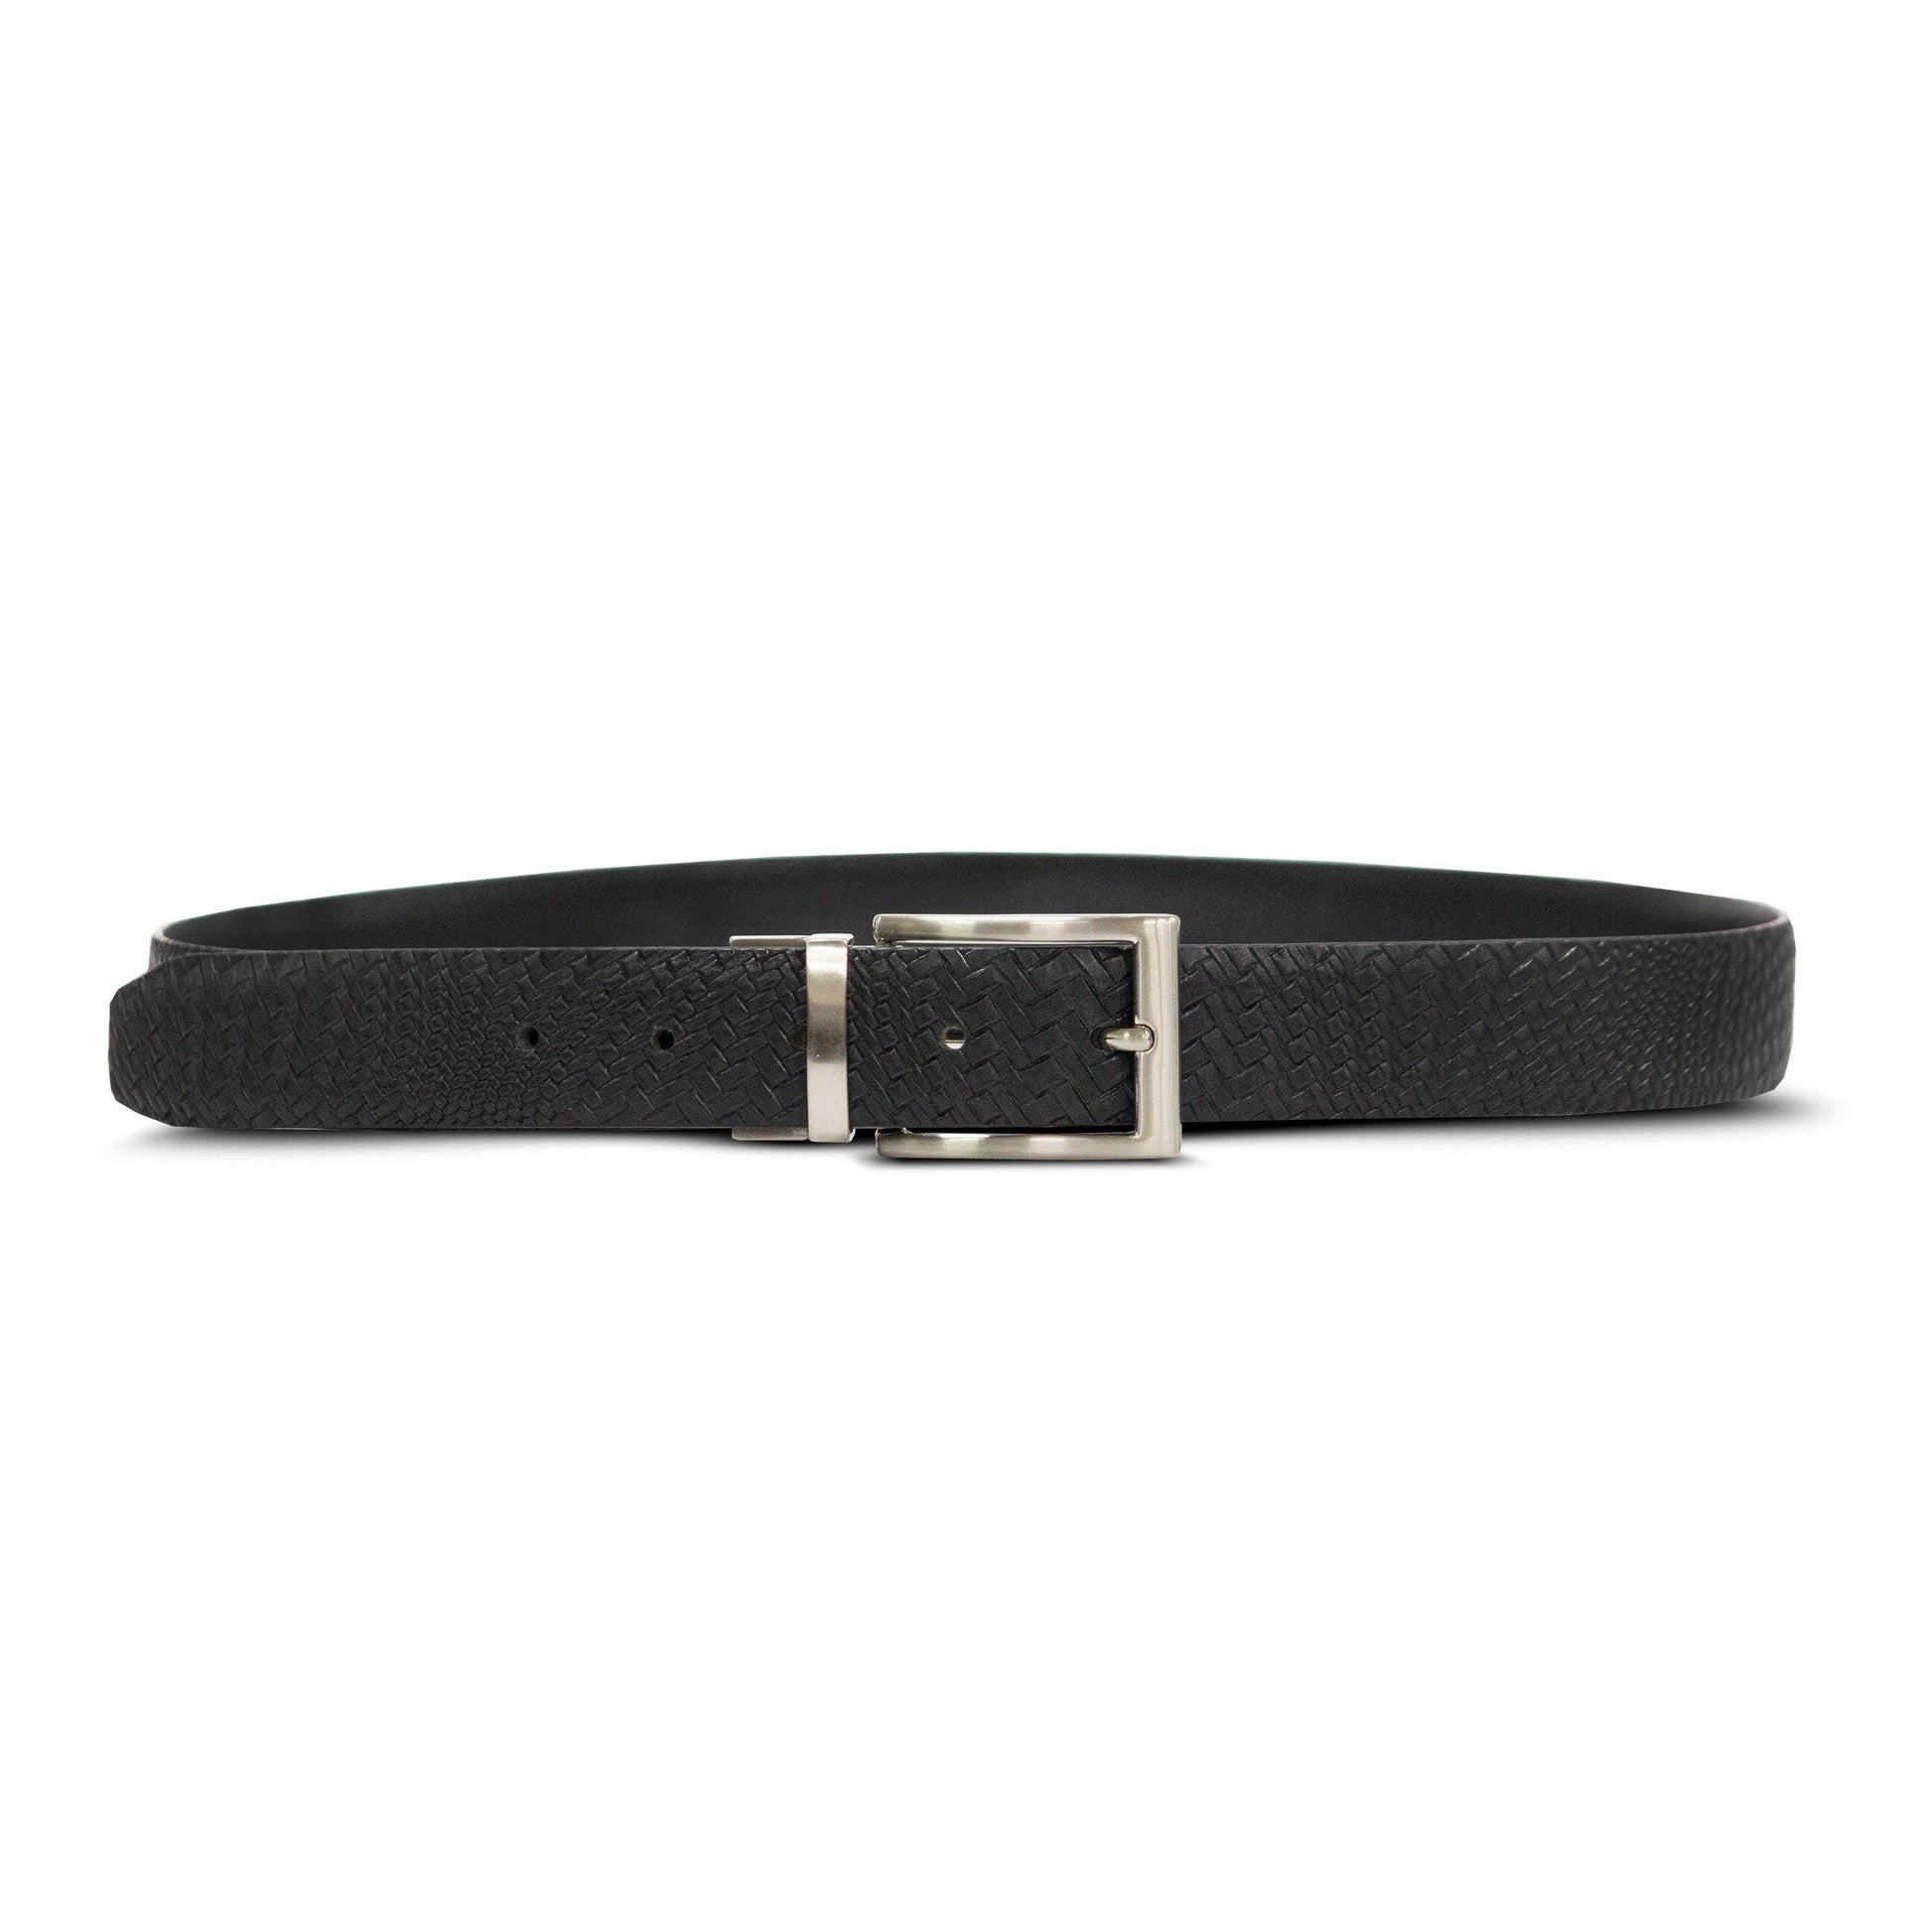 Genuine Leather Belt for Men in Weave Texture / Premium Quality Belt by ThreeSixty Leather